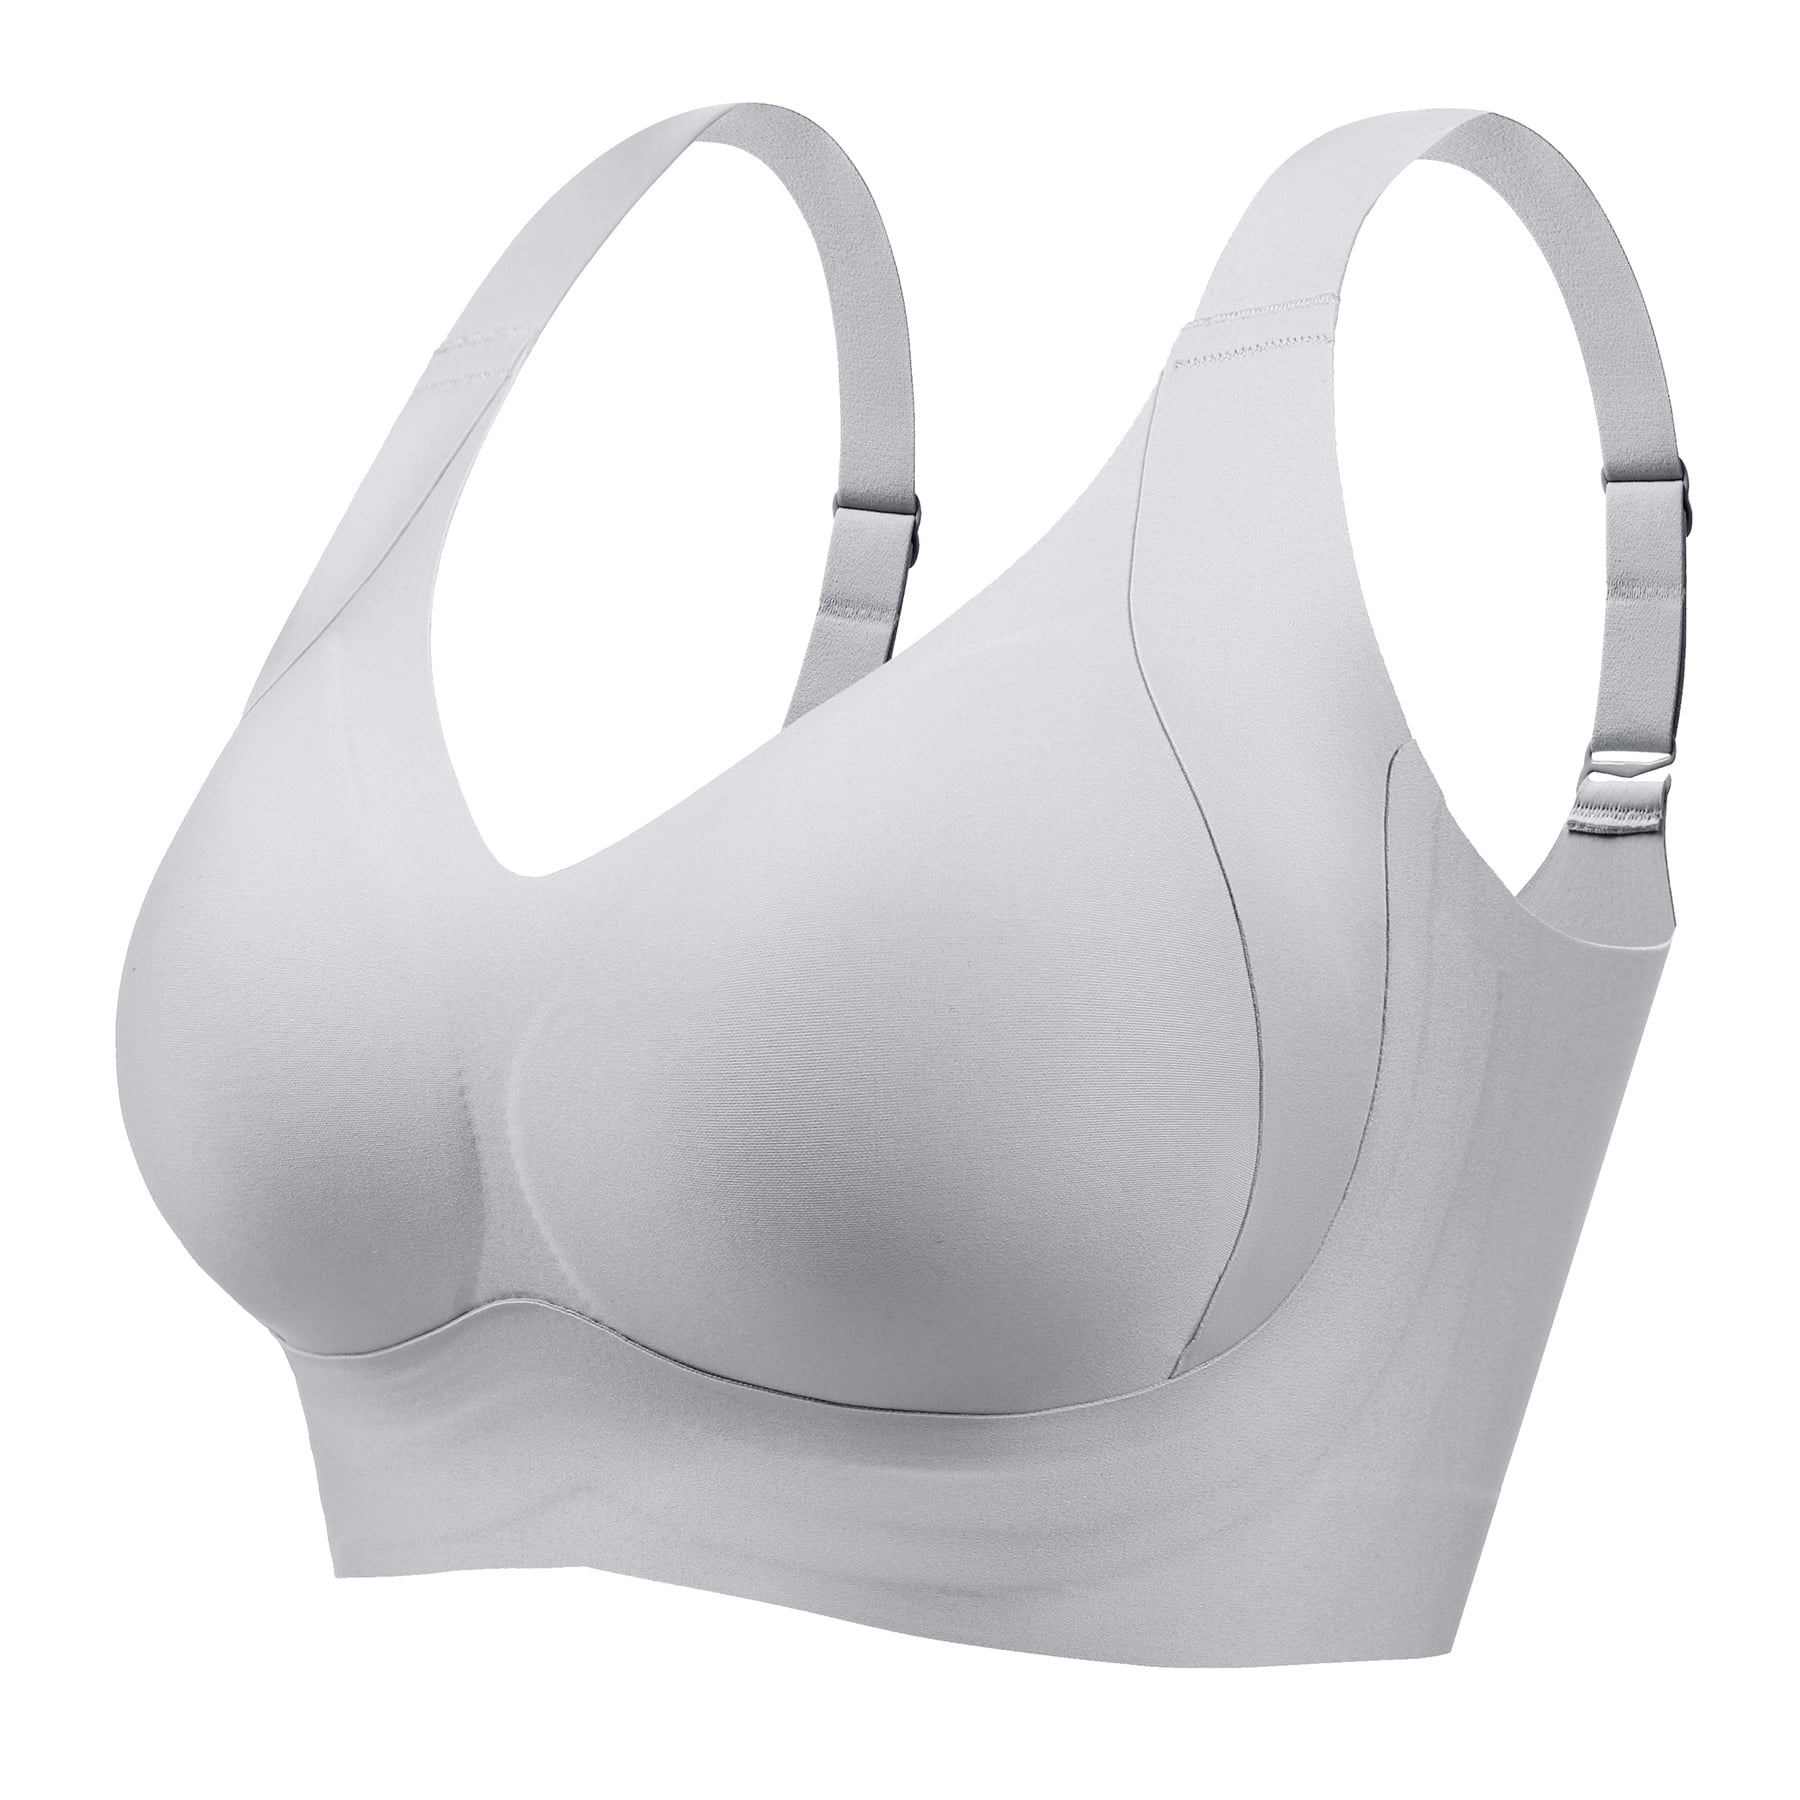 Daystry Plus Size Everyday Bras for Women Full Coverage Soft Sleep ...